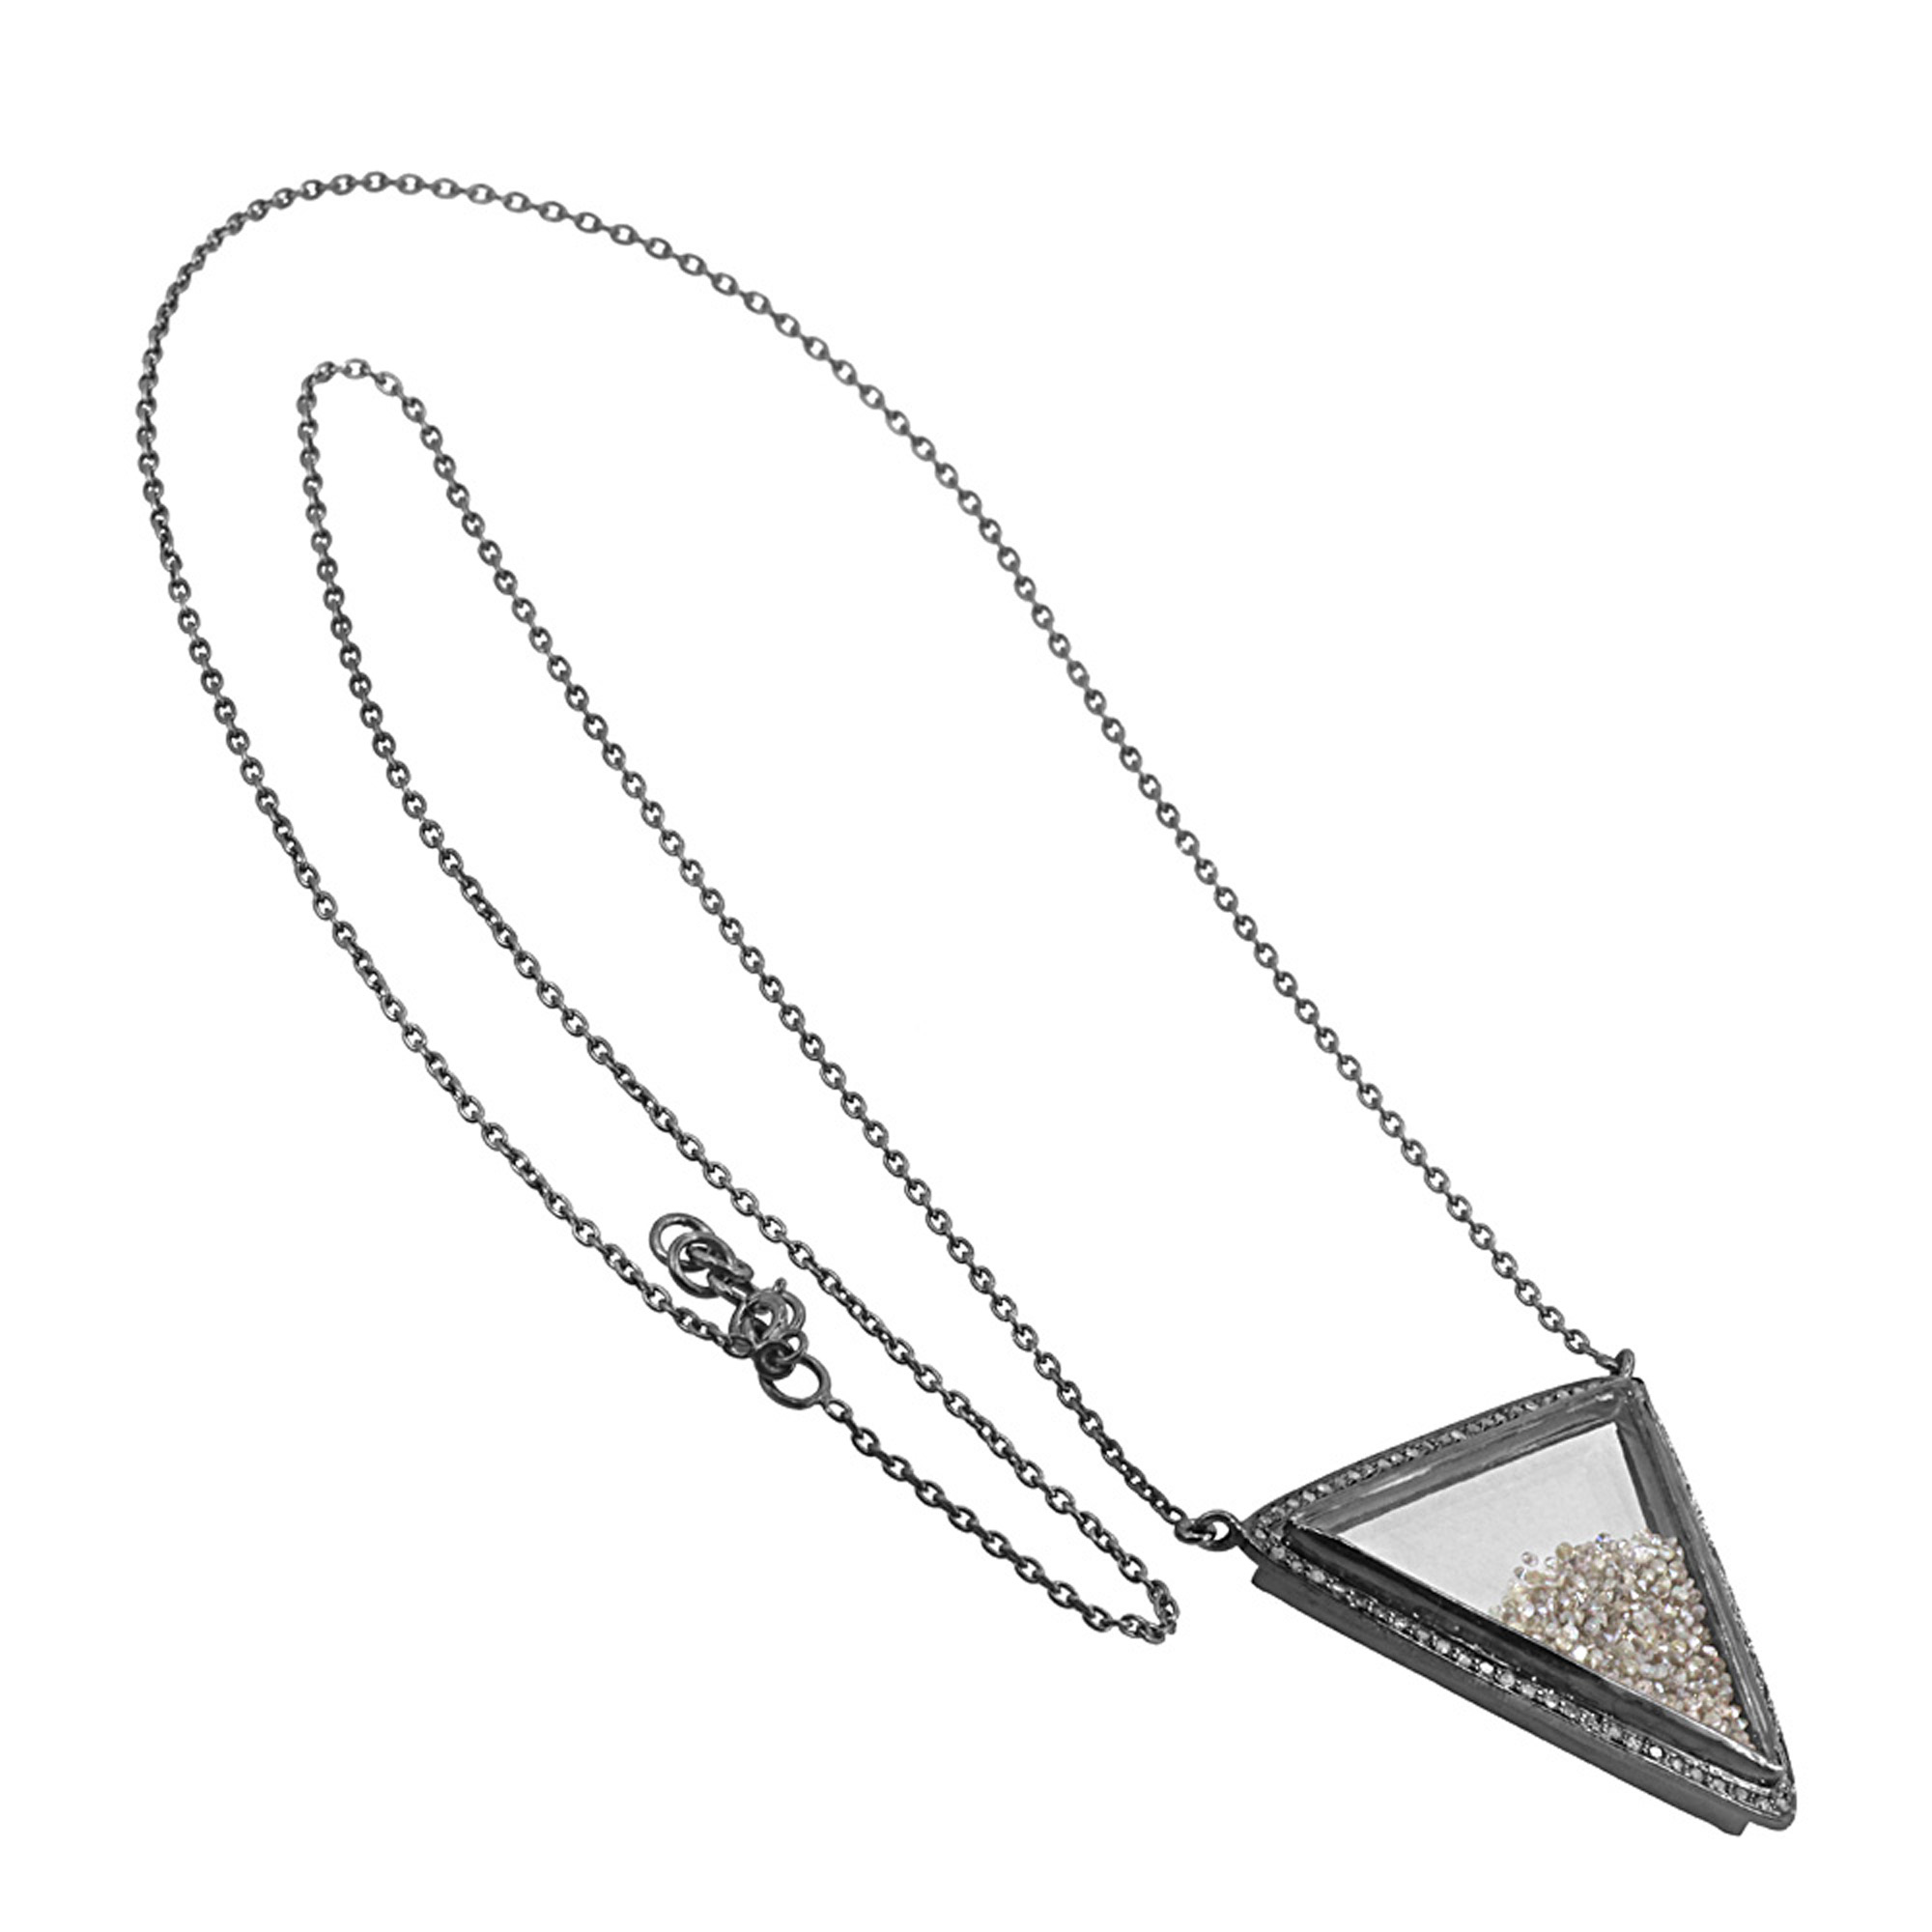 Real diamond 925 sterling silver crystal shaker pendant with chain